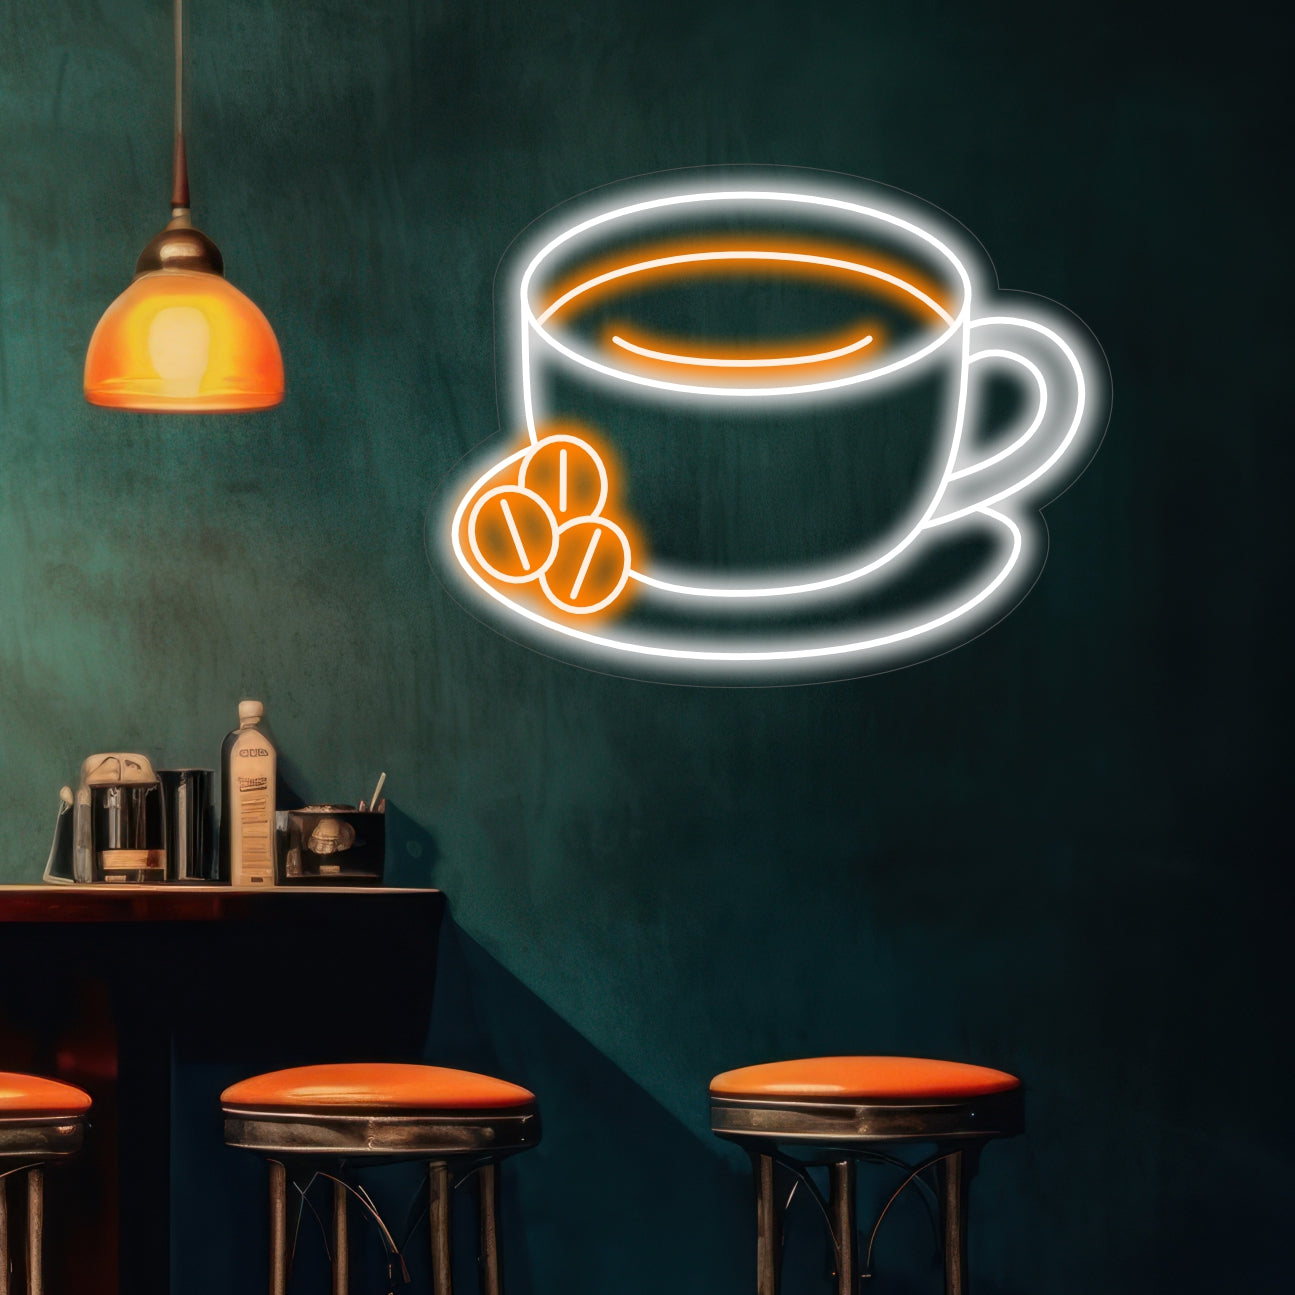 Cup On A Dish With Coffee Neon Sign